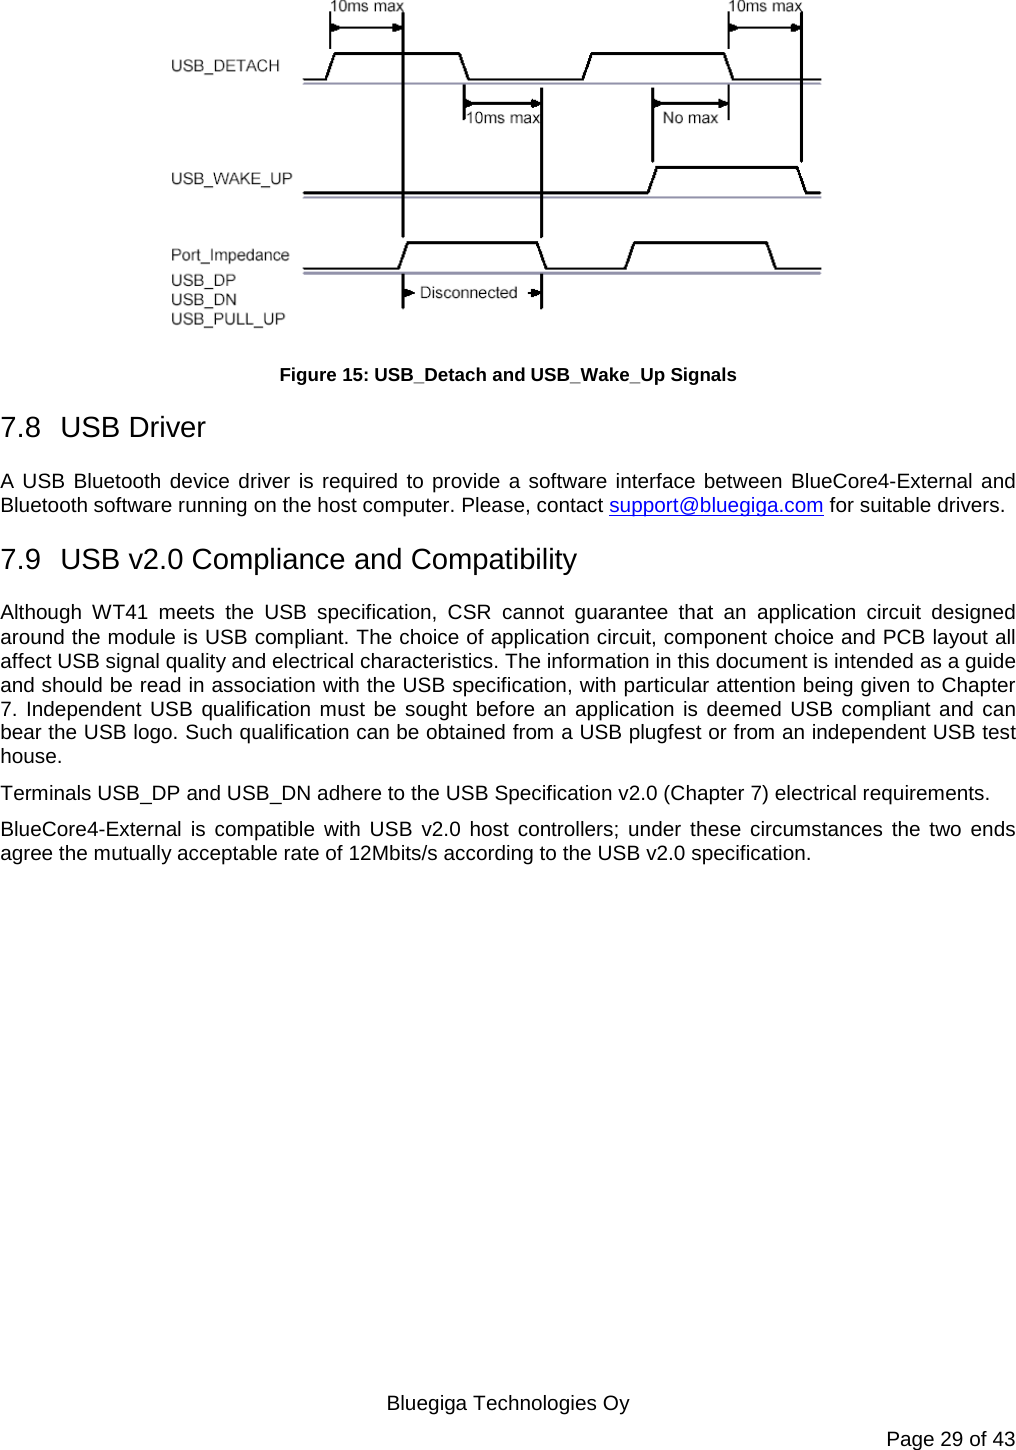   Bluegiga Technologies Oy Page 29 of 43  Figure 15: USB_Detach and USB_Wake_Up Signals 7.8 USB Driver A USB Bluetooth device driver is required to provide a software interface between BlueCore4-External and Bluetooth software running on the host computer. Please, contact support@bluegiga.com for suitable drivers. 7.9 USB v2.0 Compliance and Compatibility Although  WT41 meets the USB specification, CSR cannot guarantee that an application circuit designed around the module is USB compliant. The choice of application circuit, component choice and PCB layout all affect USB signal quality and electrical characteristics. The information in this document is intended as a guide and should be read in association with the USB specification, with particular attention being given to Chapter 7. Independent USB qualification must be sought before an application is deemed USB compliant and can bear the USB logo. Such qualification can be obtained from a USB plugfest or from an independent USB test house. Terminals USB_DP and USB_DN adhere to the USB Specification v2.0 (Chapter 7) electrical requirements. BlueCore4-External is compatible with USB v2.0 host controllers; under these circumstances the two ends agree the mutually acceptable rate of 12Mbits/s according to the USB v2.0 specification.  